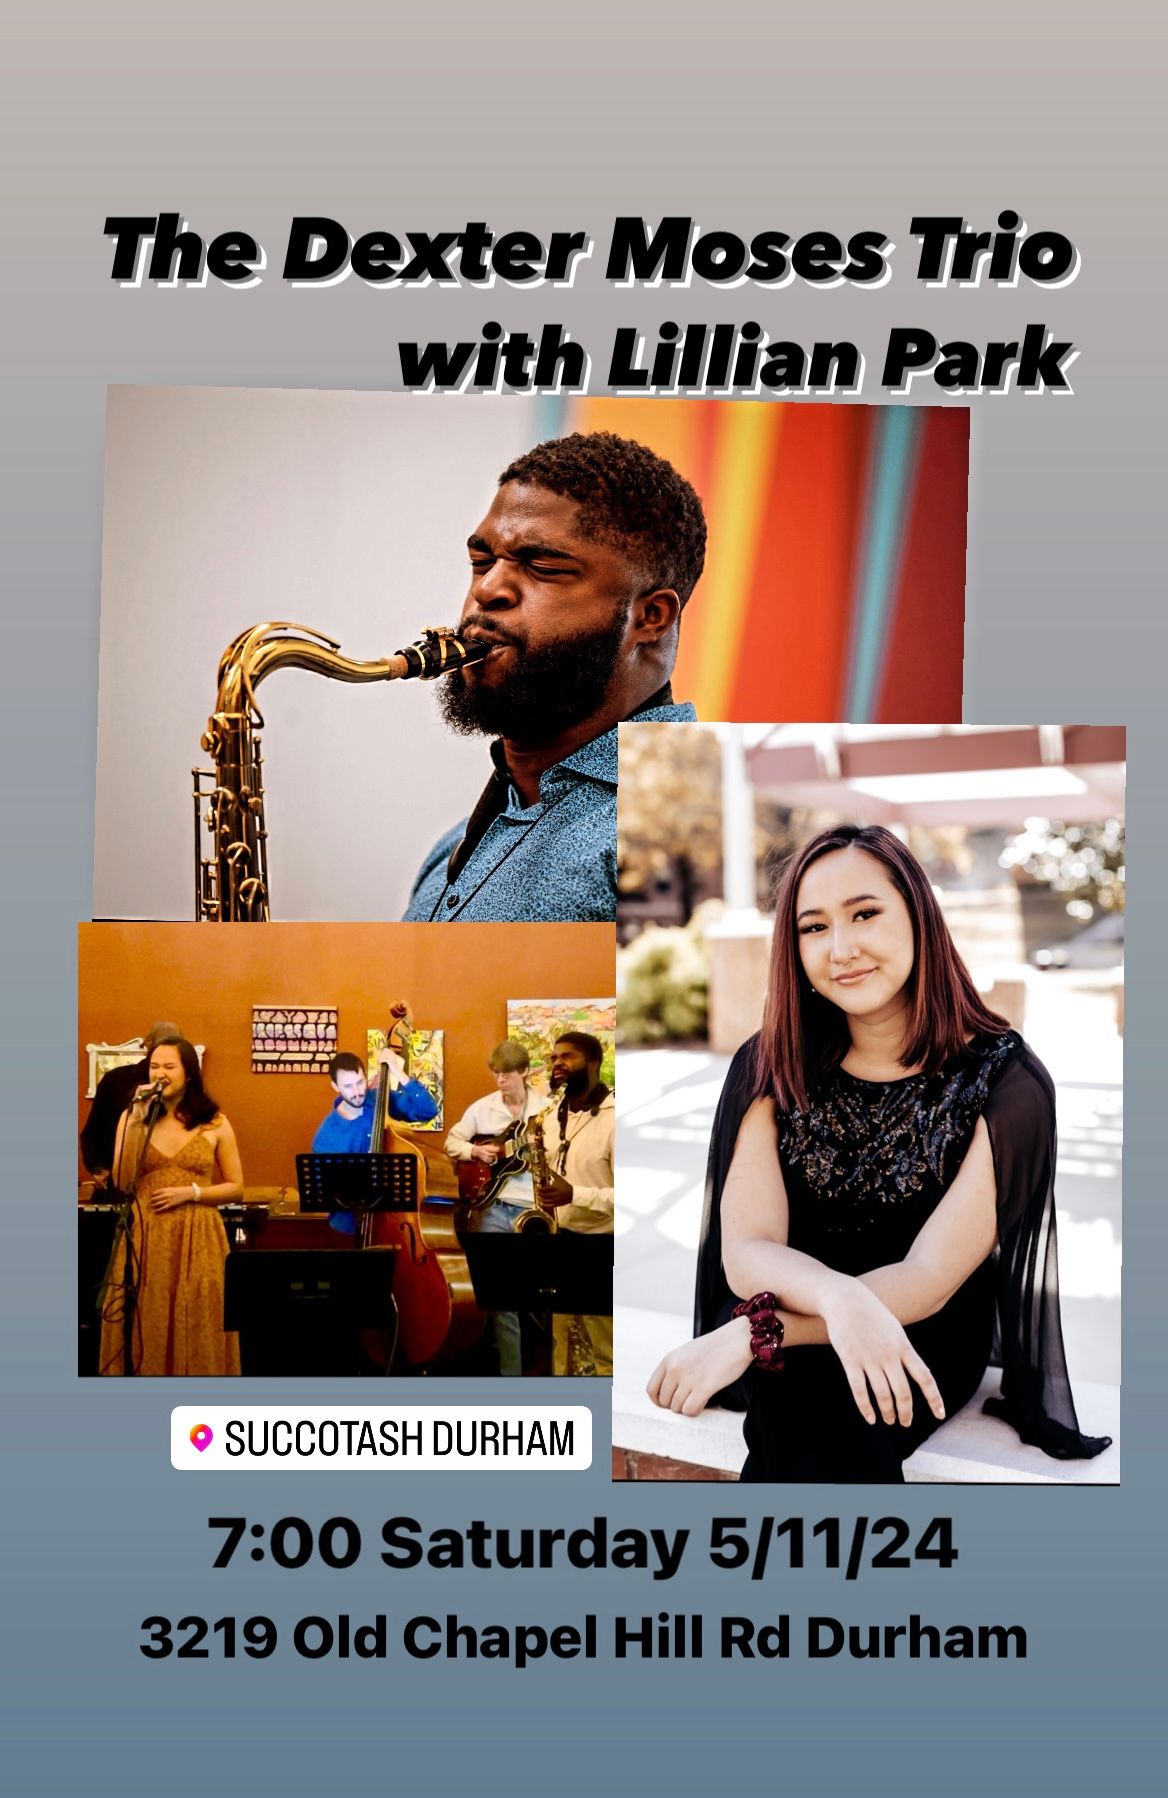 Dexter Moses Trio with Lillian Park